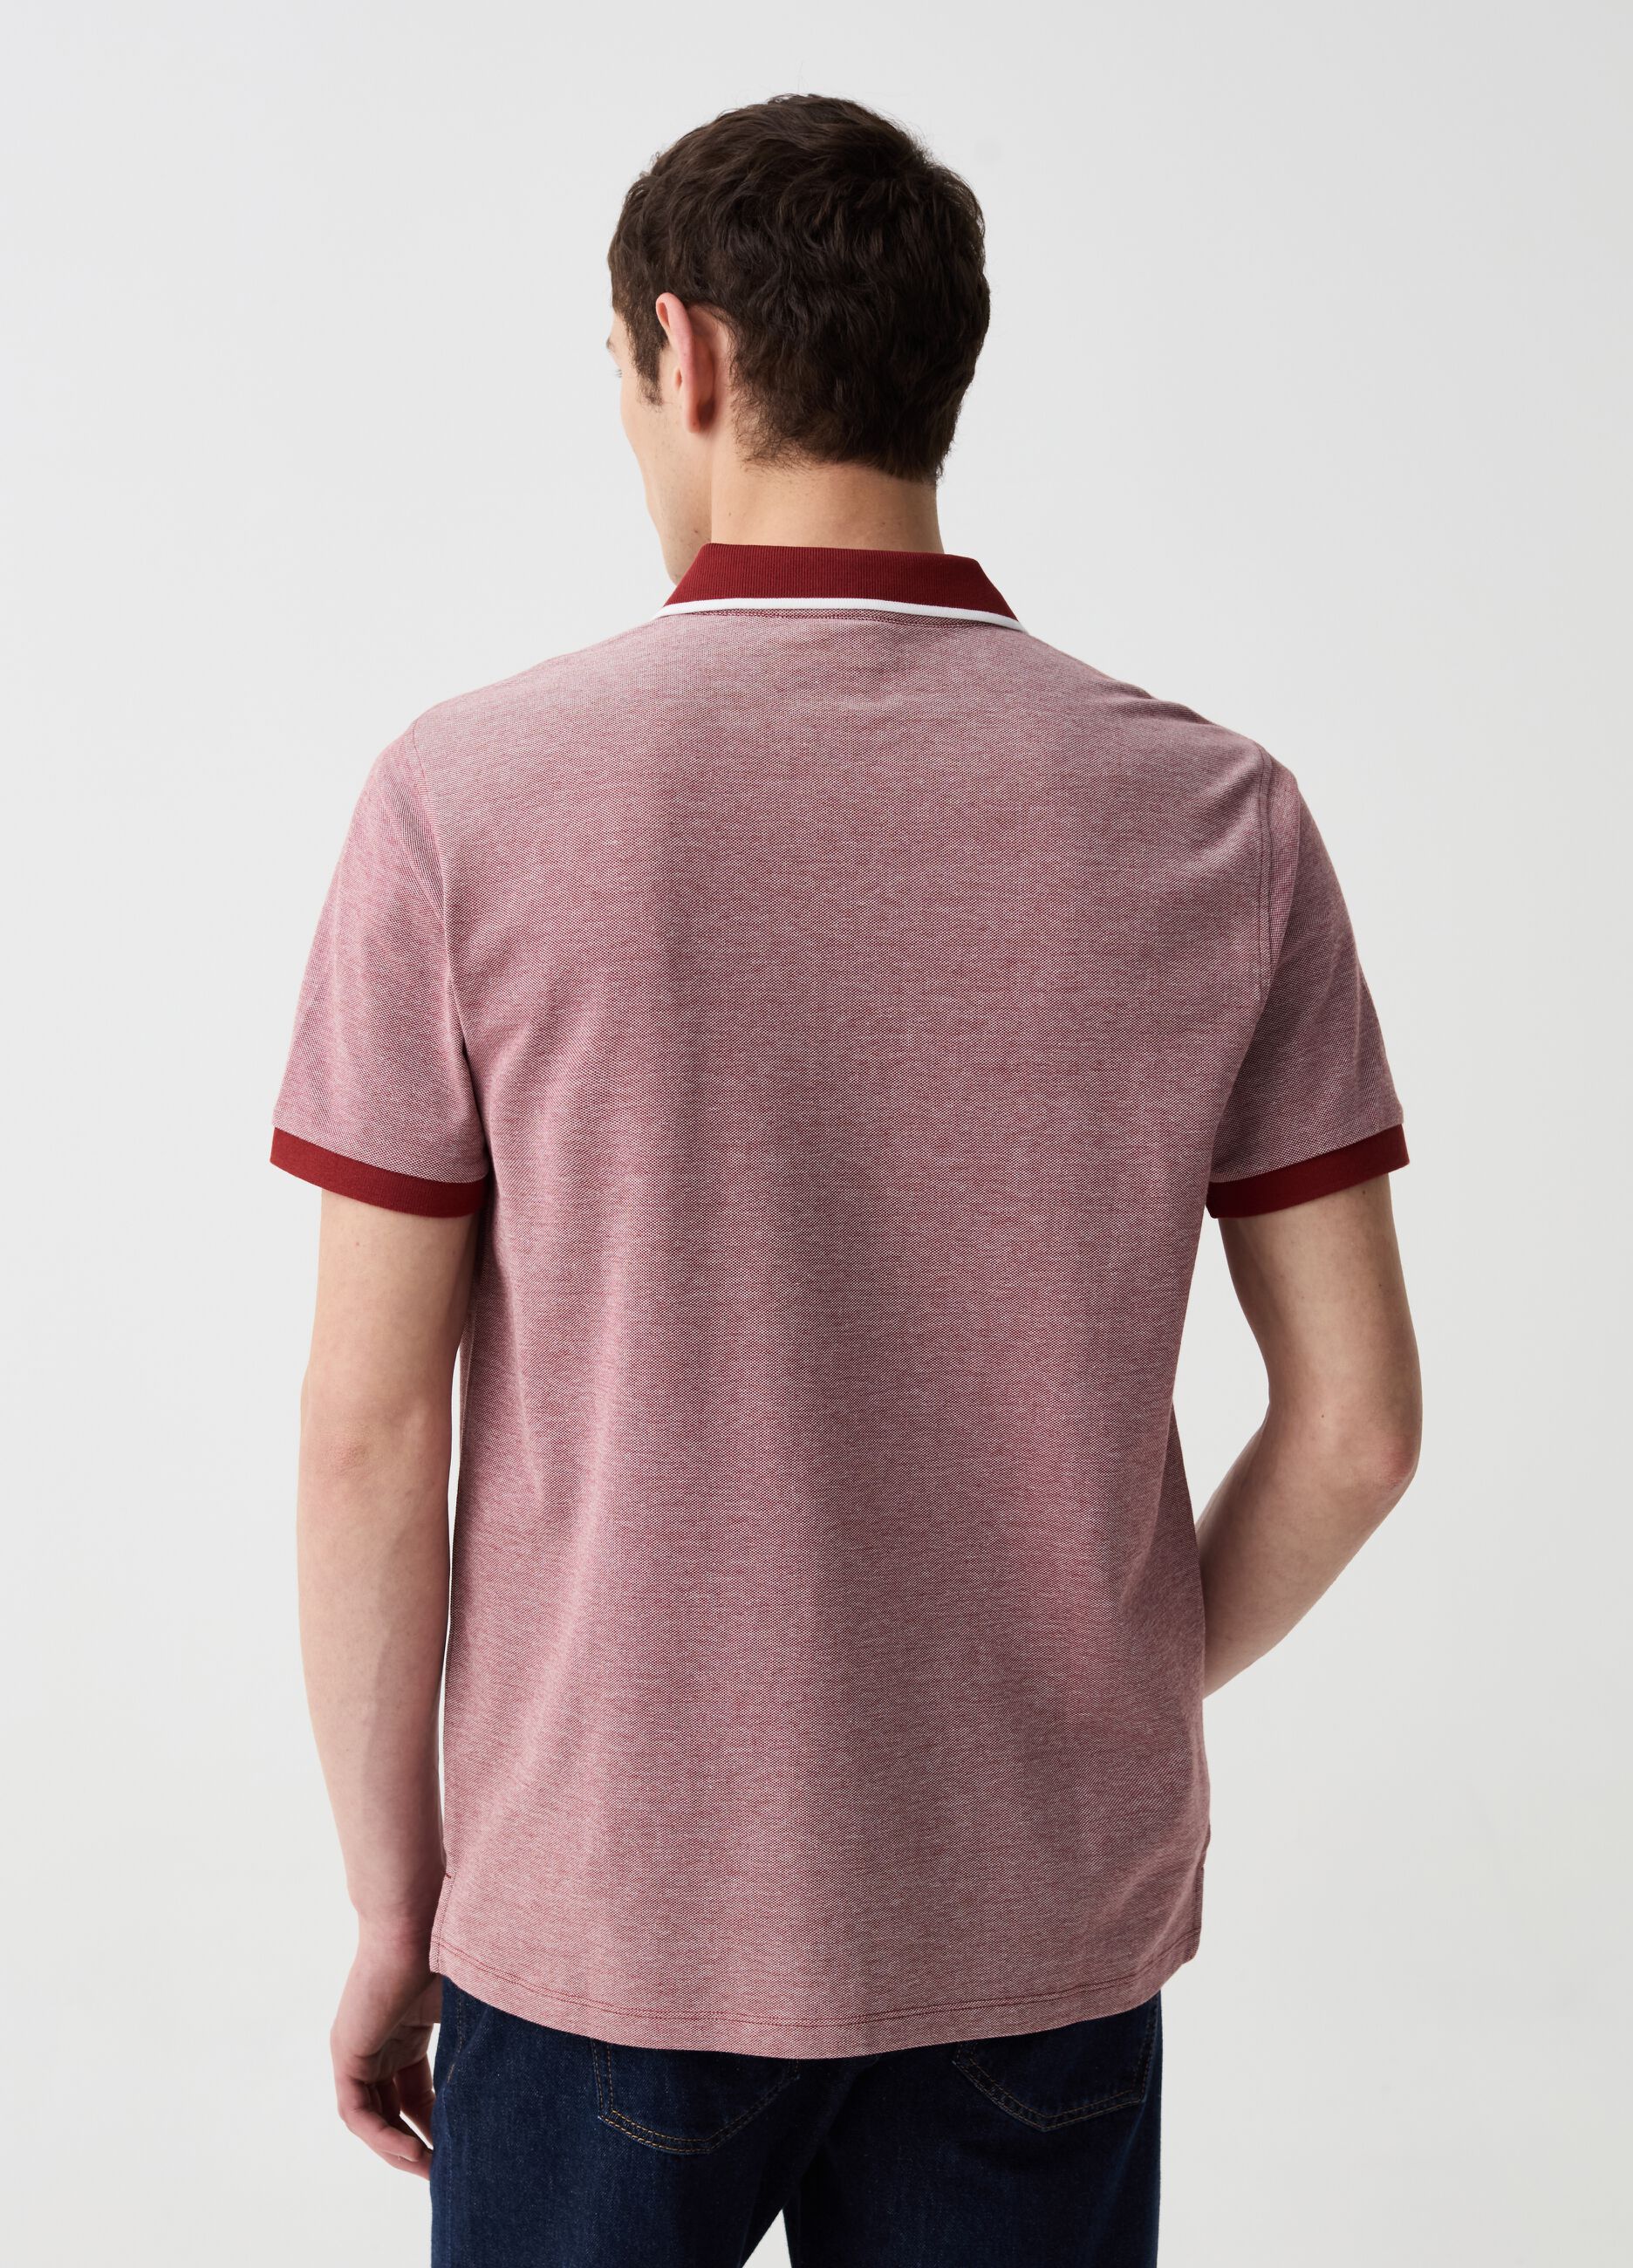 Piquet polo shirt with jacquard weave